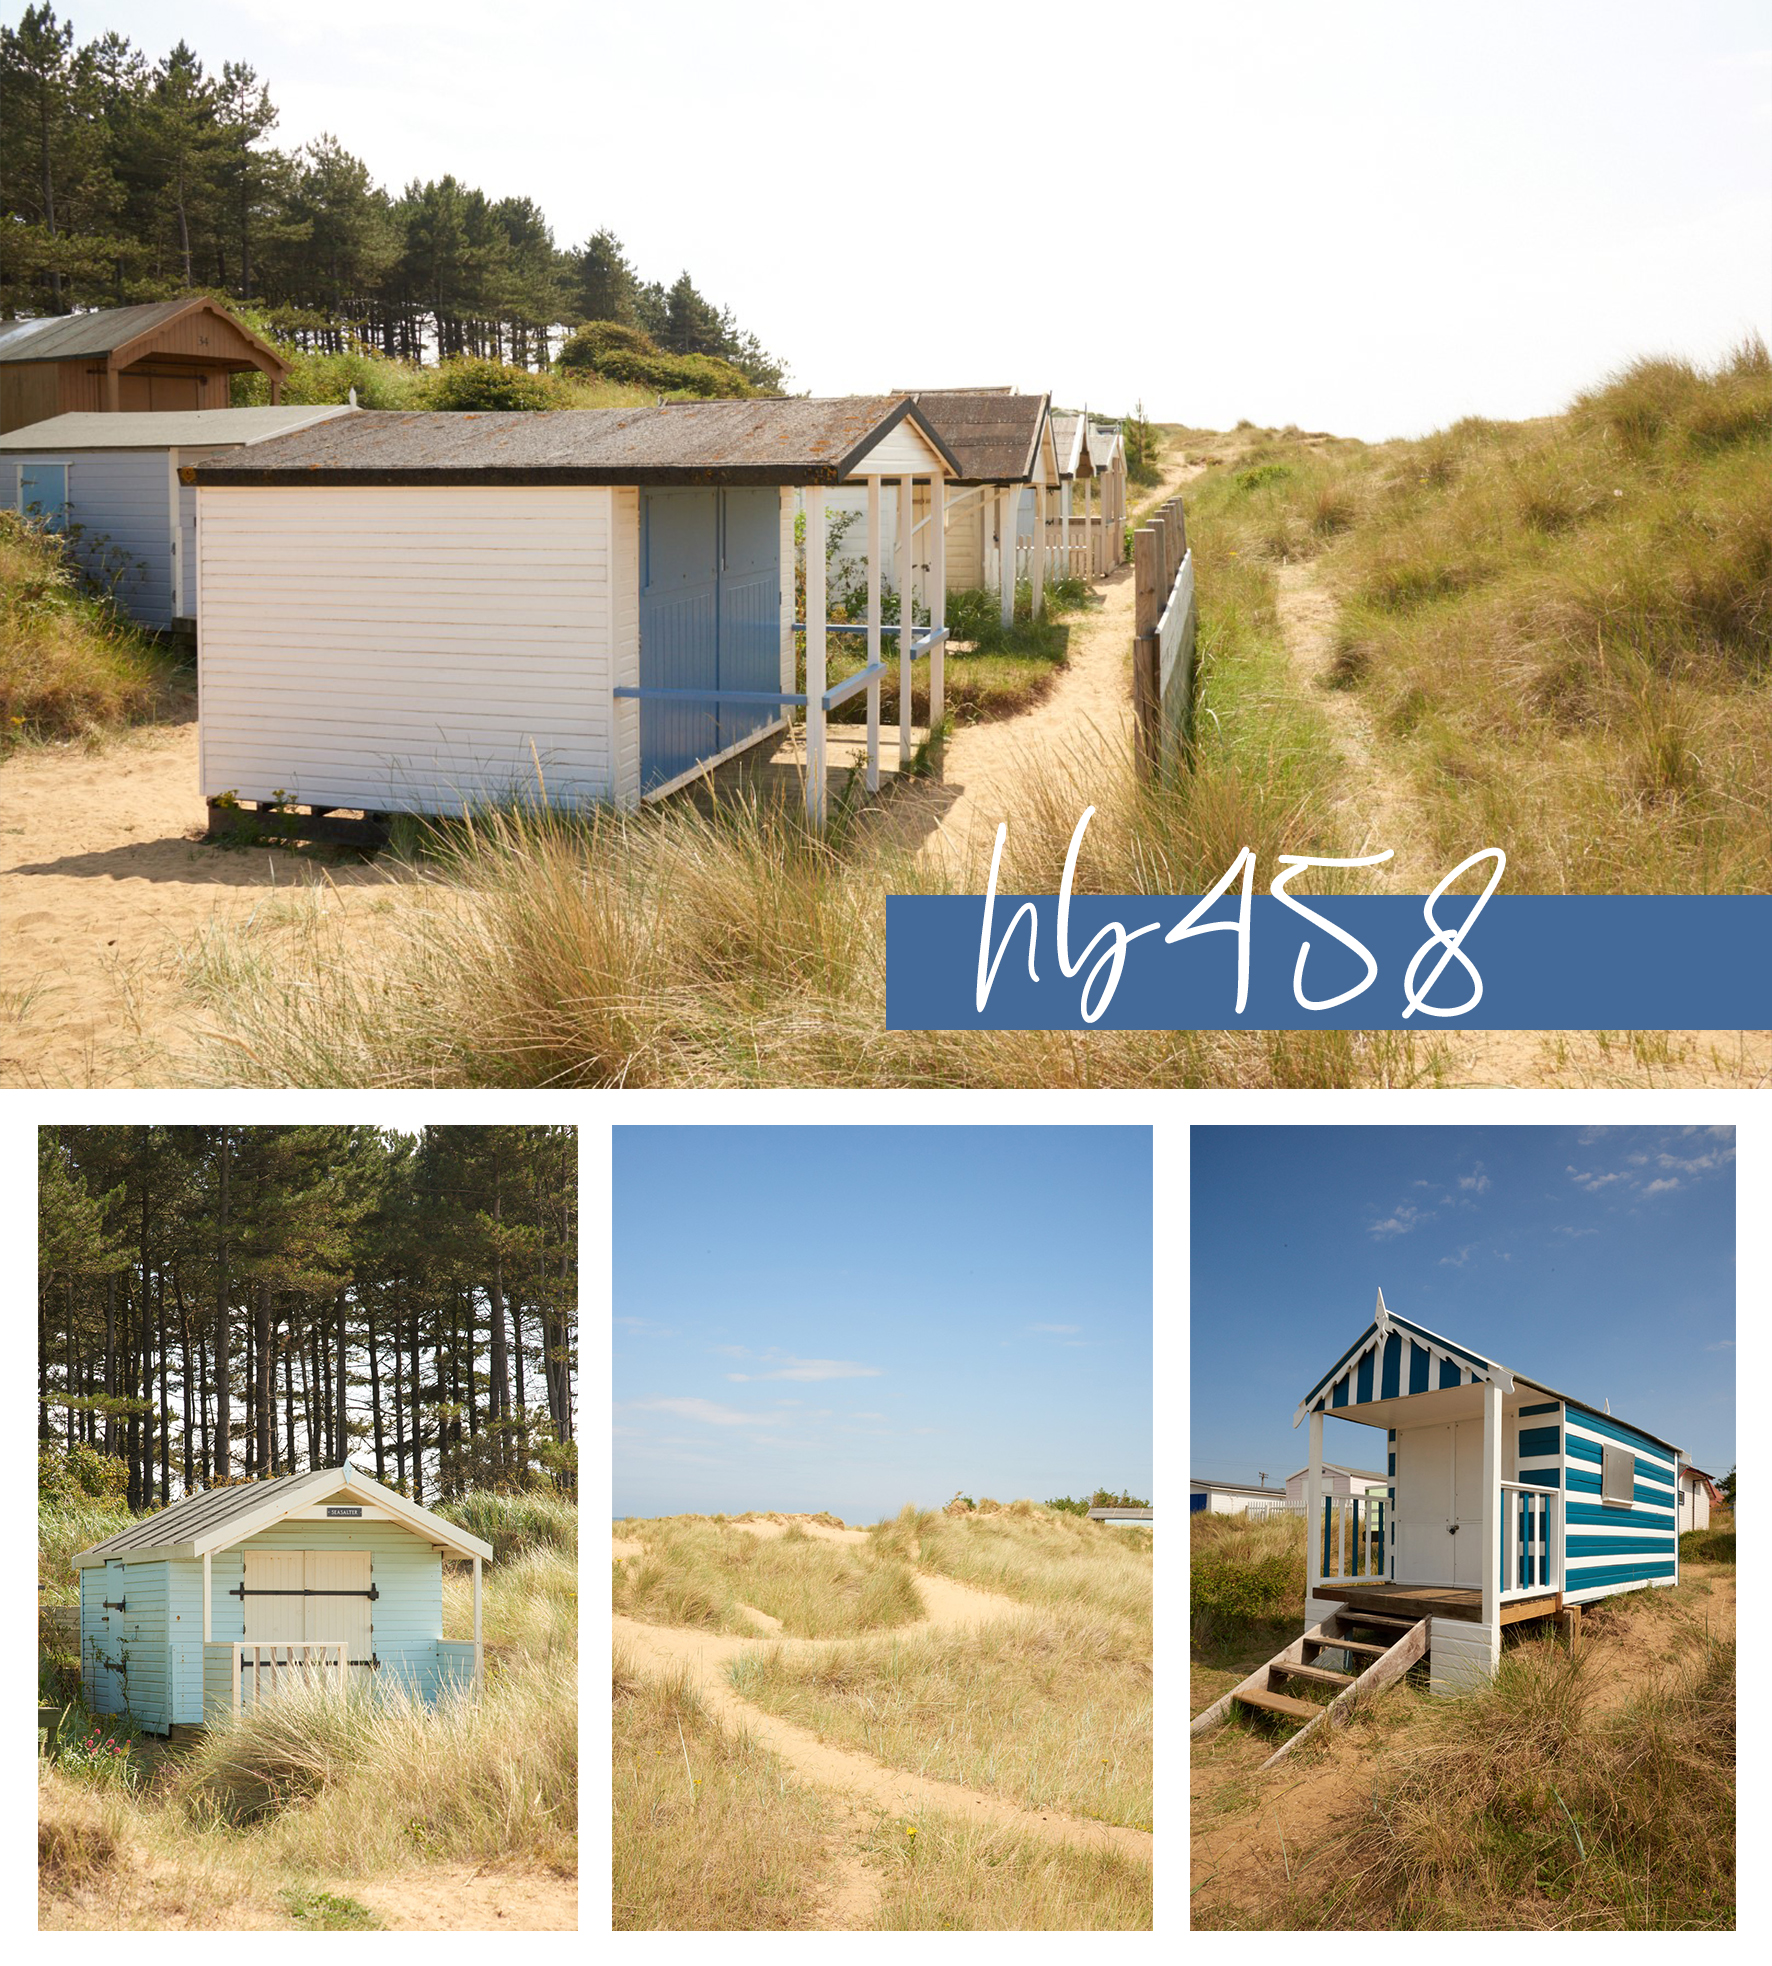 A collection of images from this white sandy beach and grassy sand dunes.